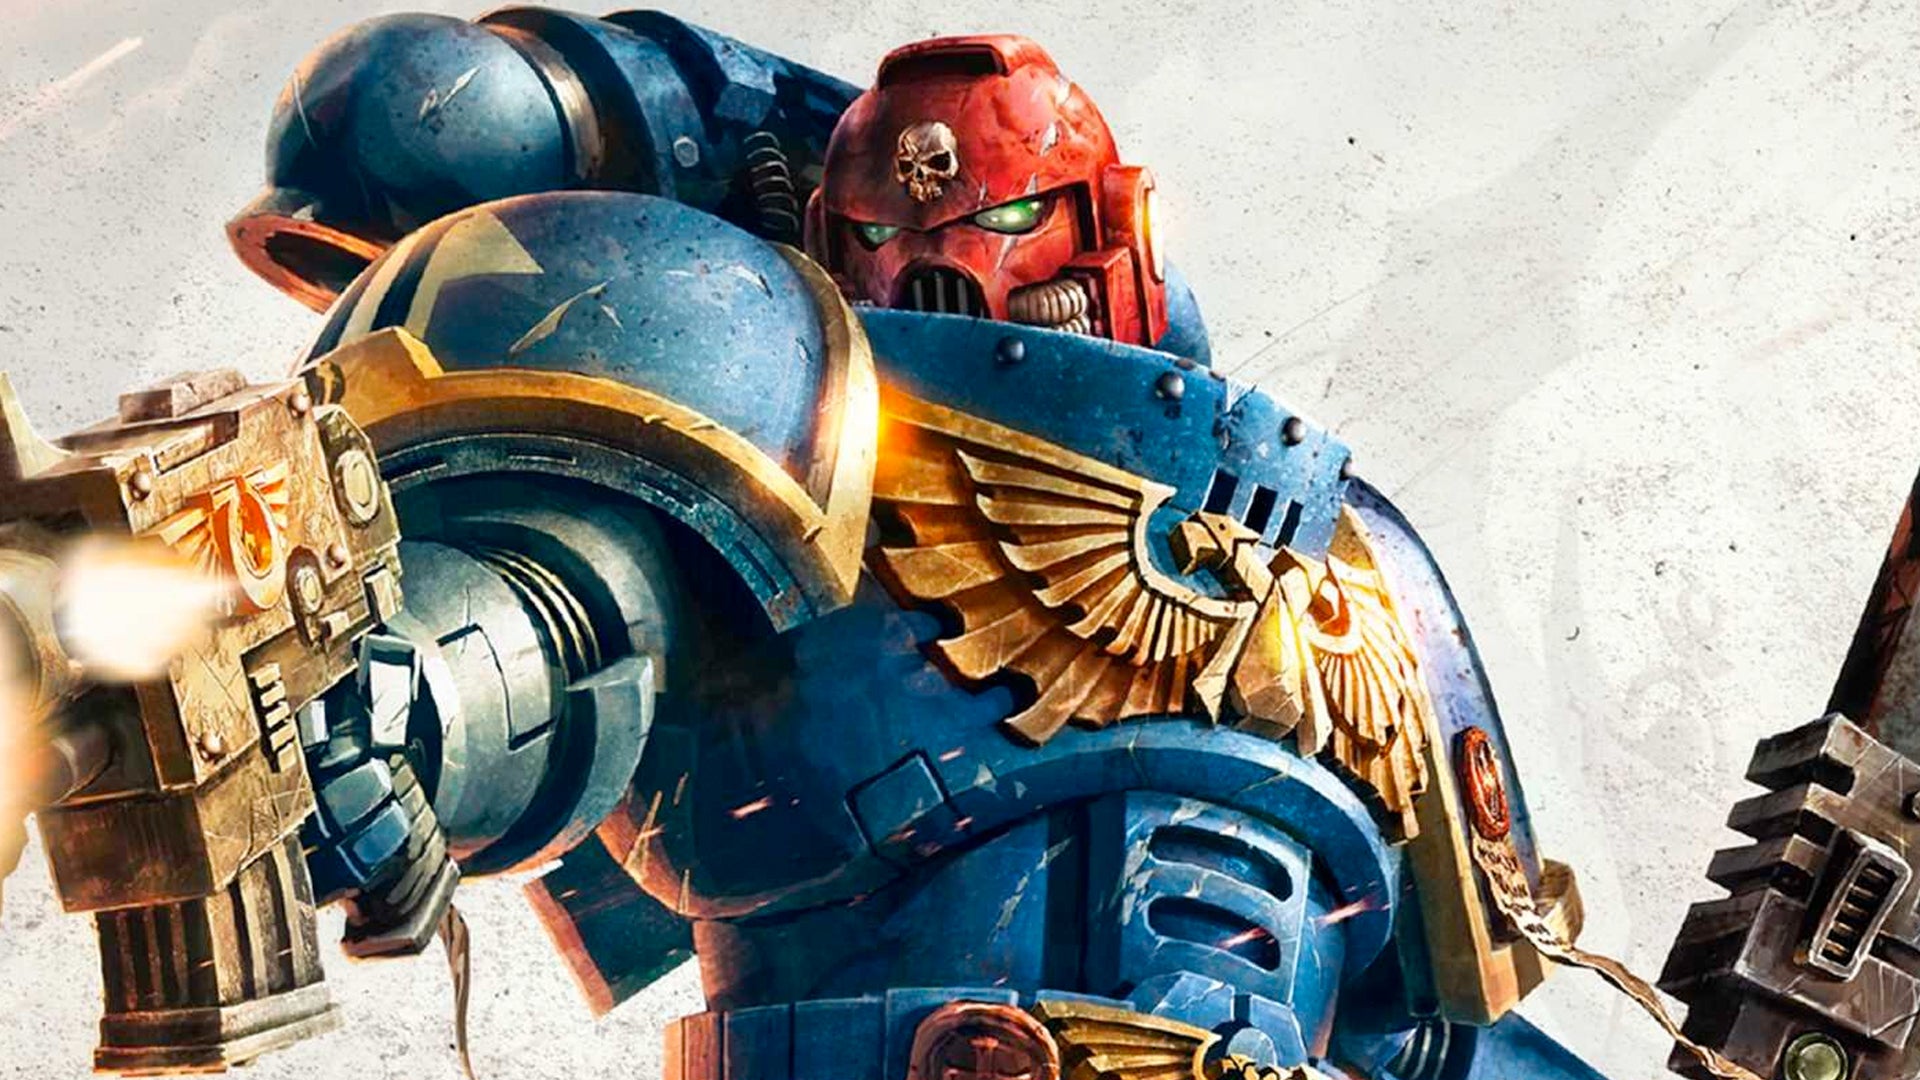 Image for Warhammer 40,000 Black Library bundle offers an instant collection of Space Marines books from under £1